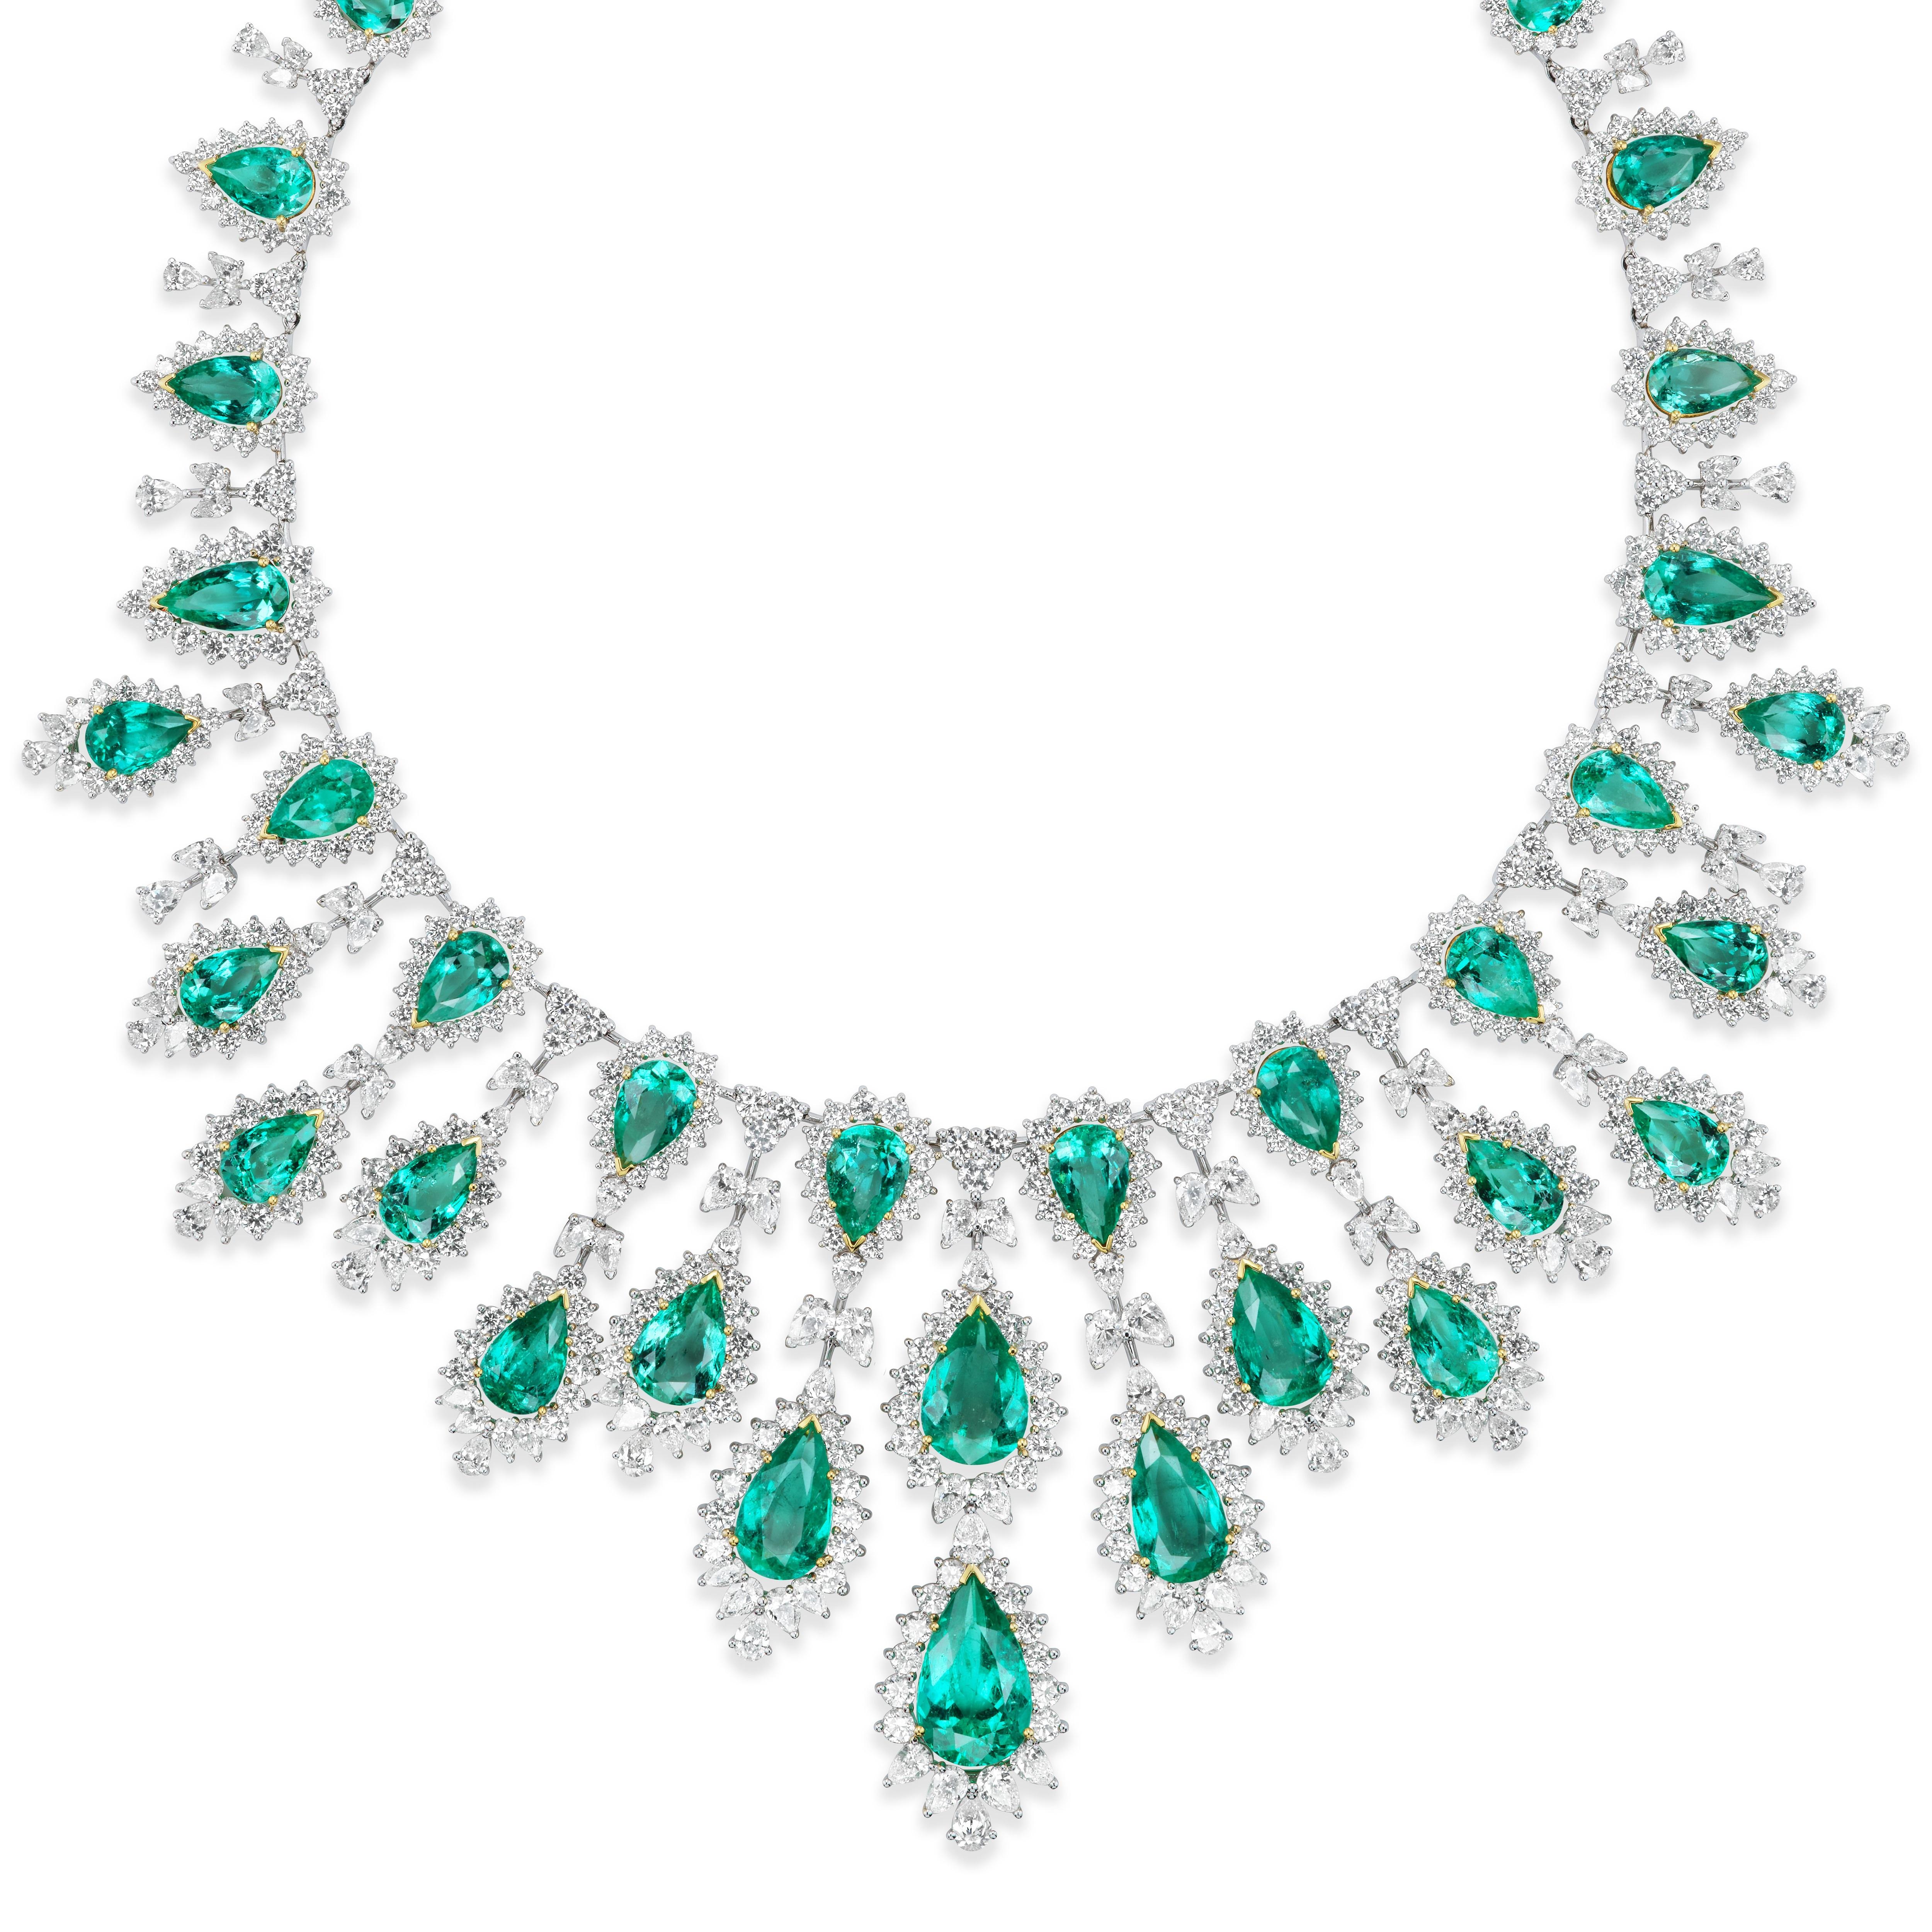 Contemporary Van Necklace & Earrings Suite (220.66 ct Colombian Emeralds & Diamonds) in 18K For Sale